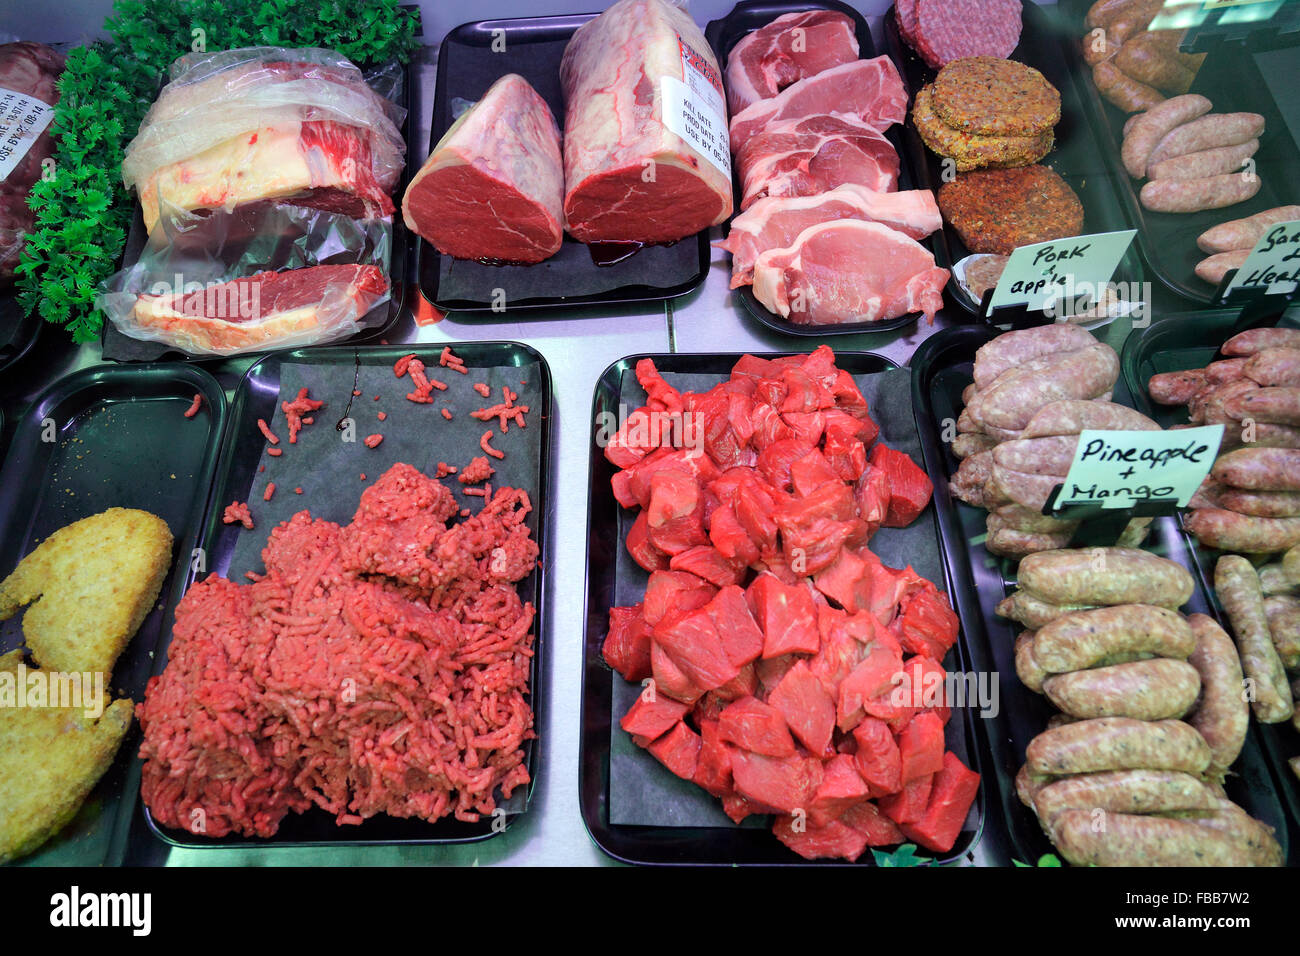 meat counter in a supermarket Stock Photo